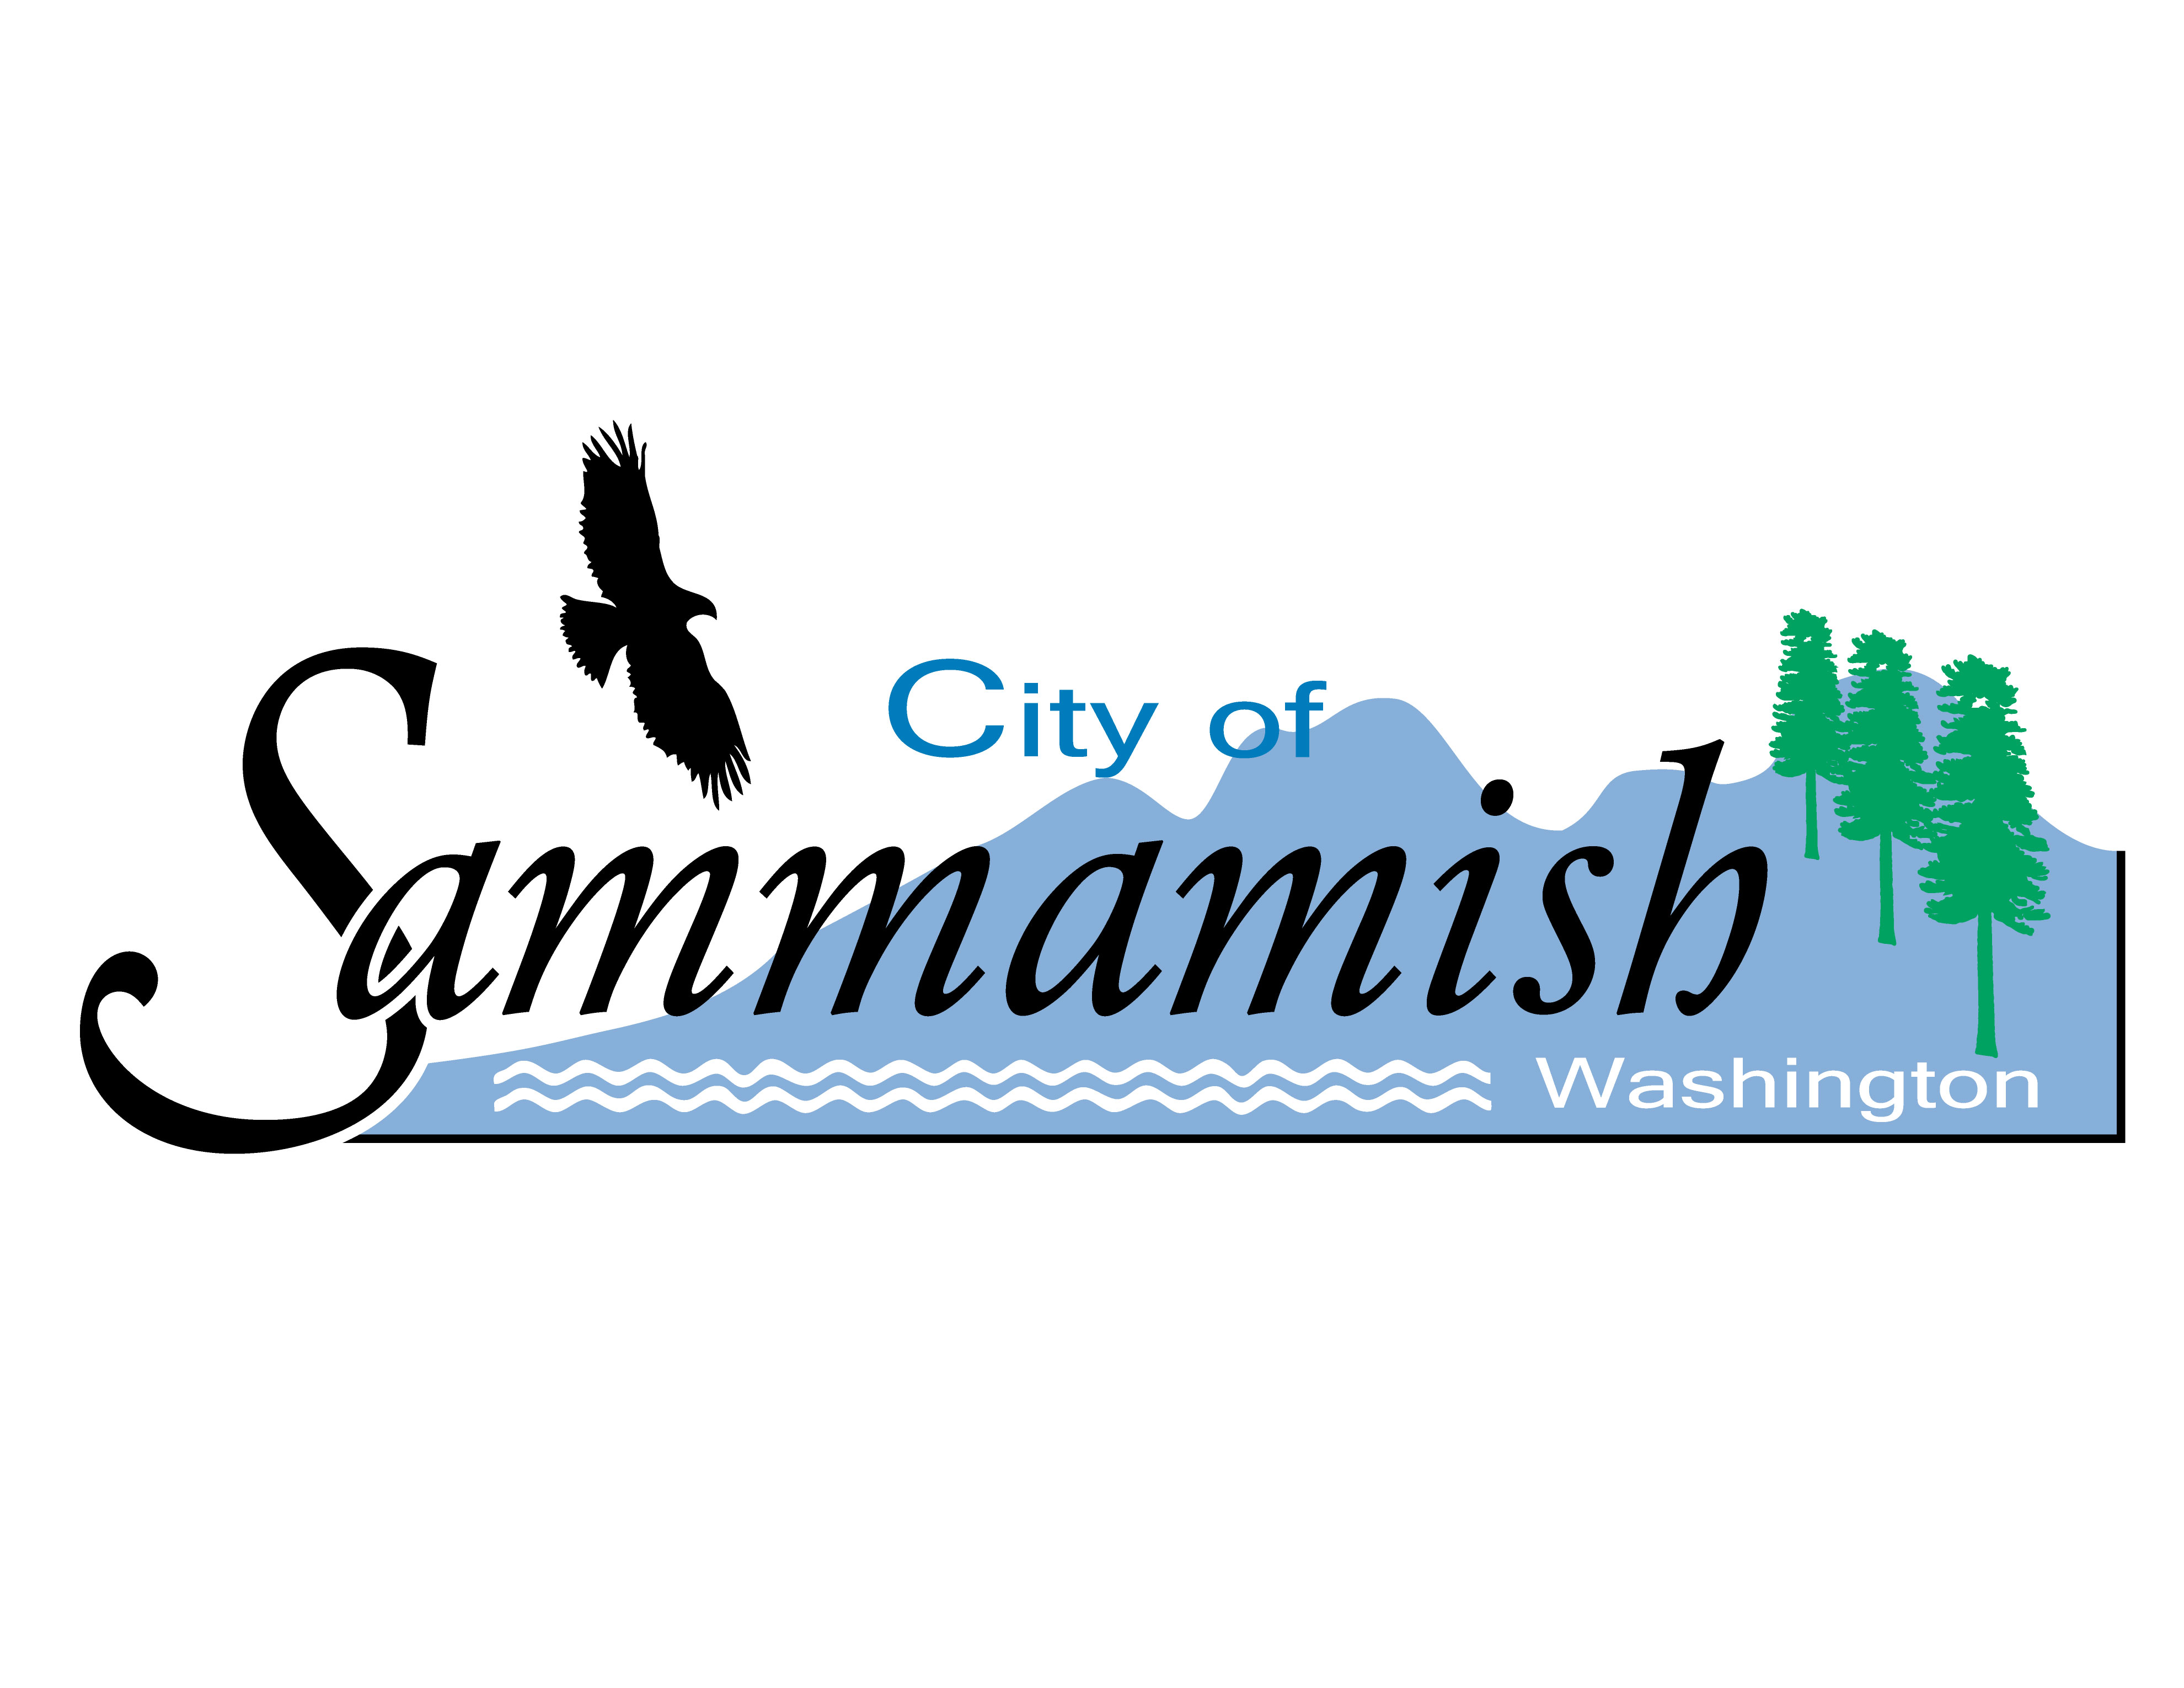 City logo for City of Sammamish Washington with blue water and (nongradient) mountains, white ripples in the water, green coniferous trees, and black sillhoutte of soaring bird.